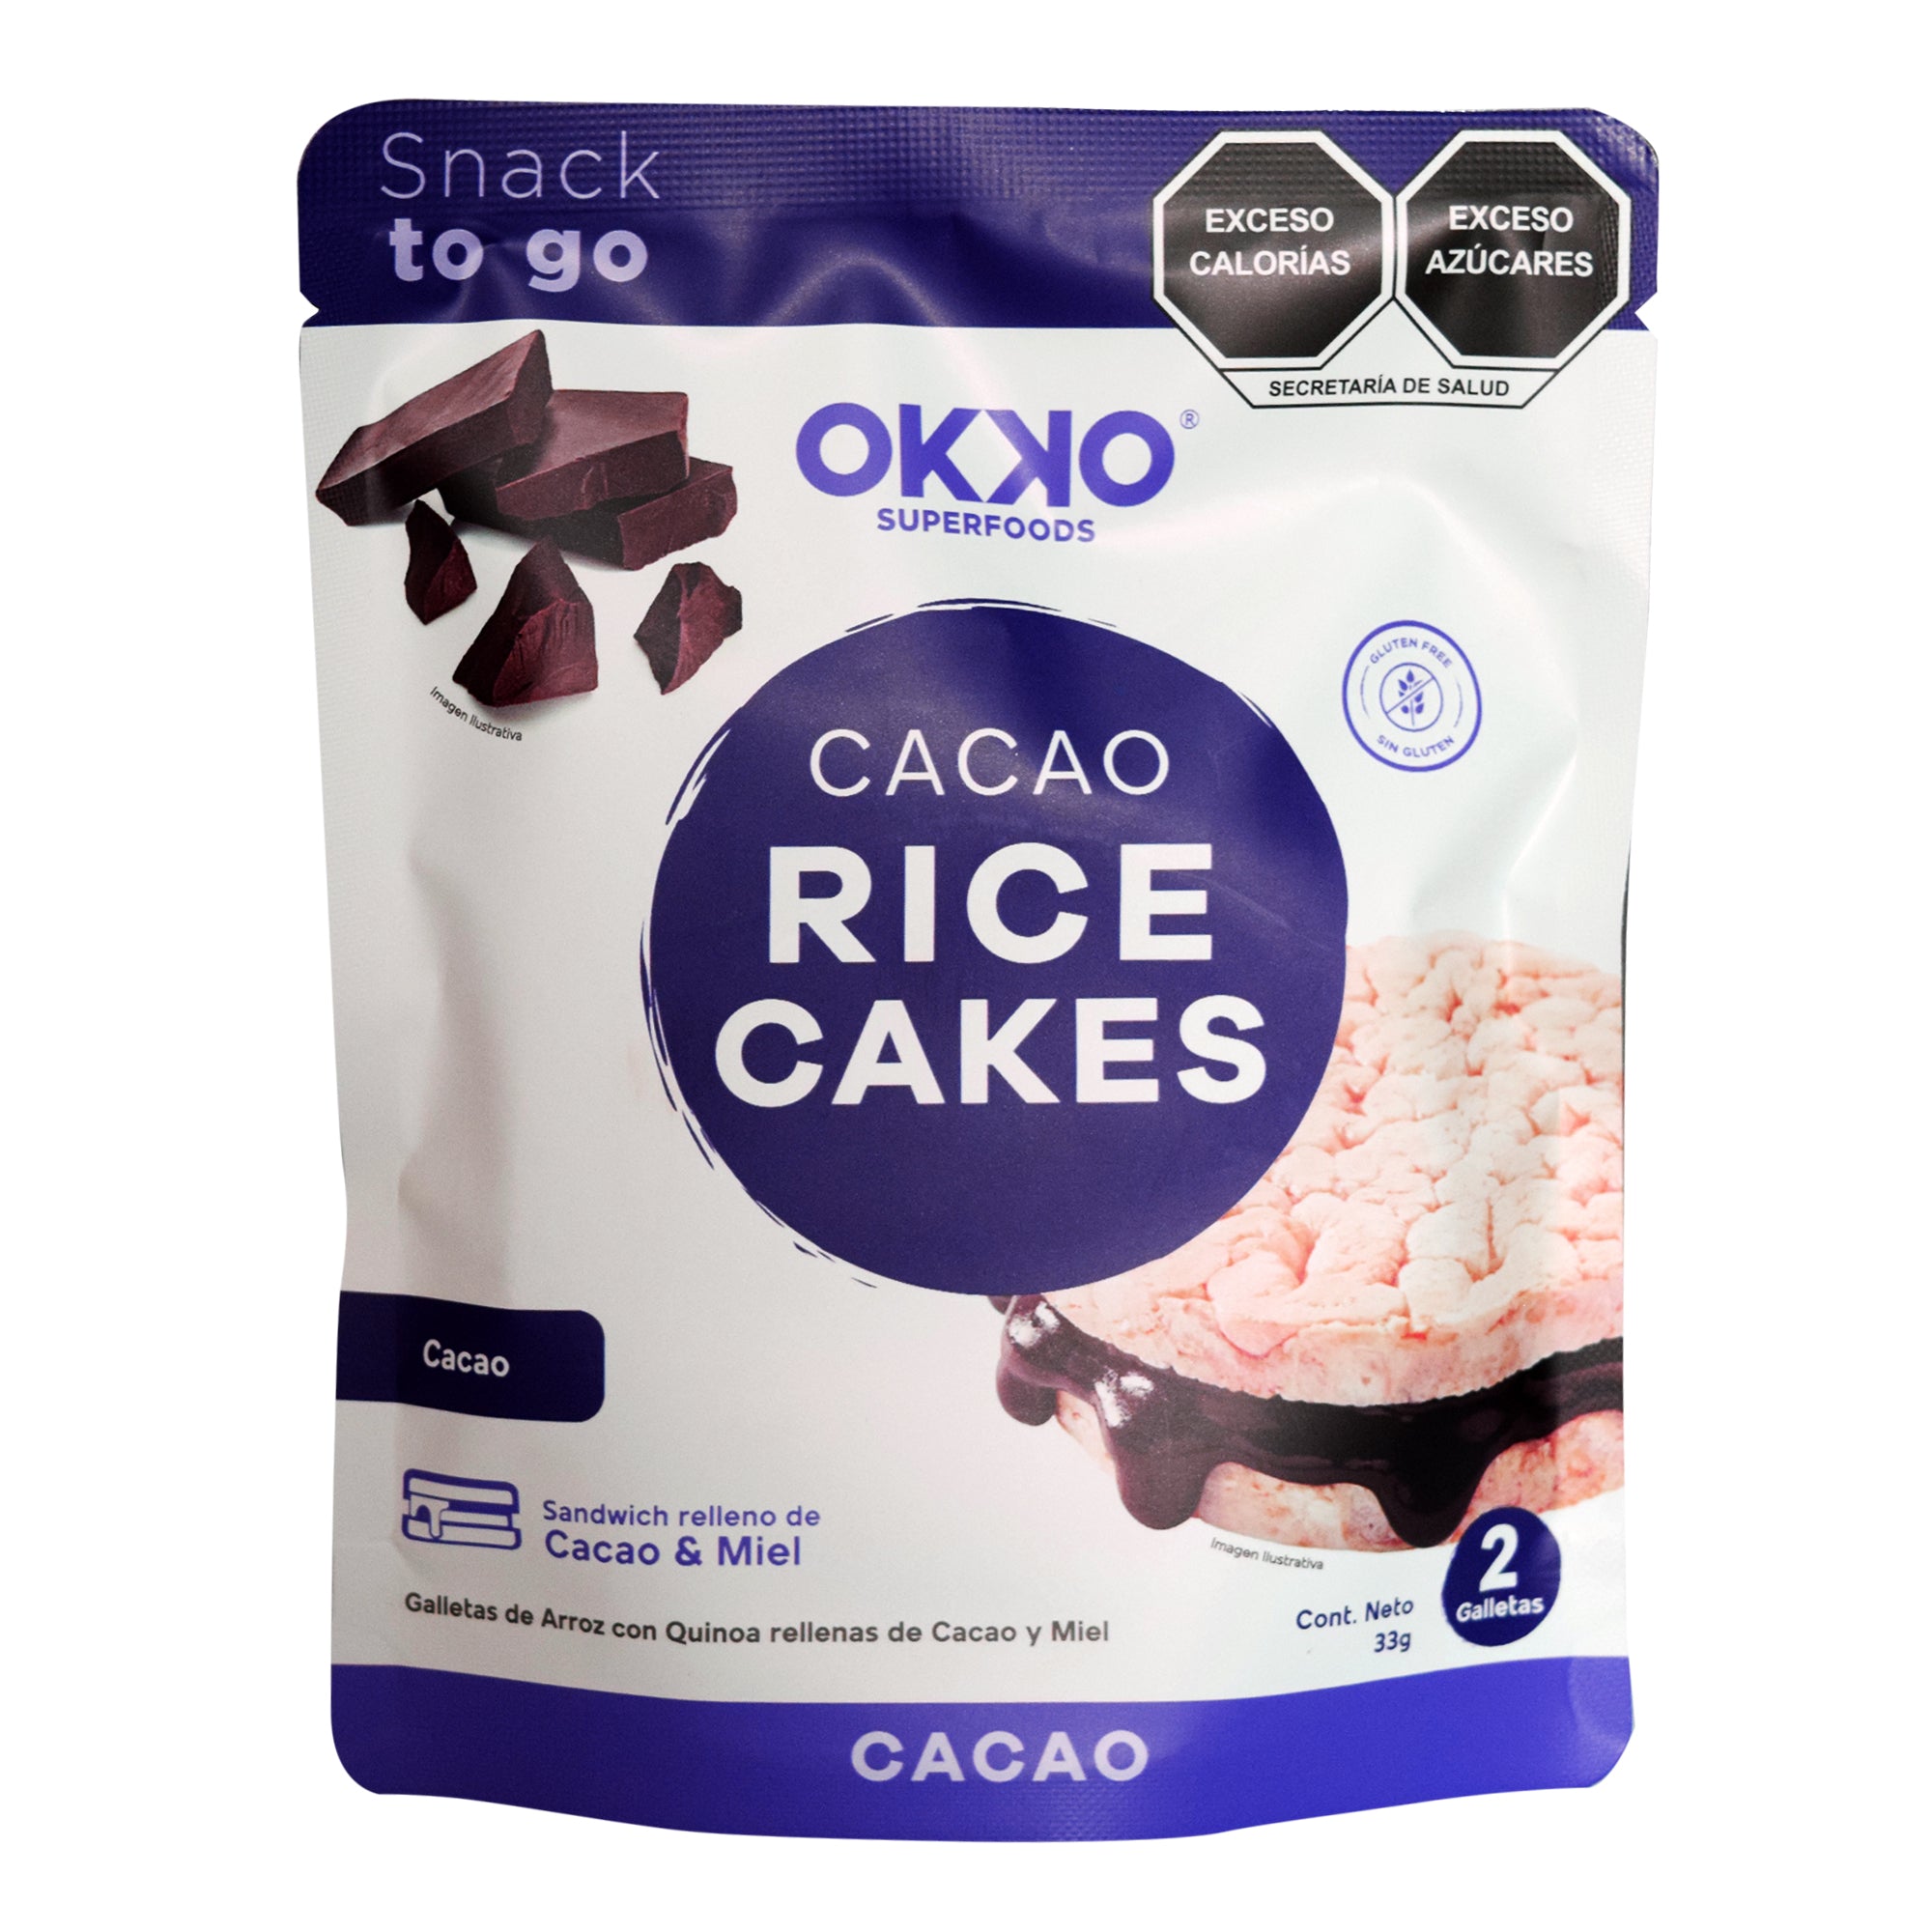 Cocoa rice cakes 33 g